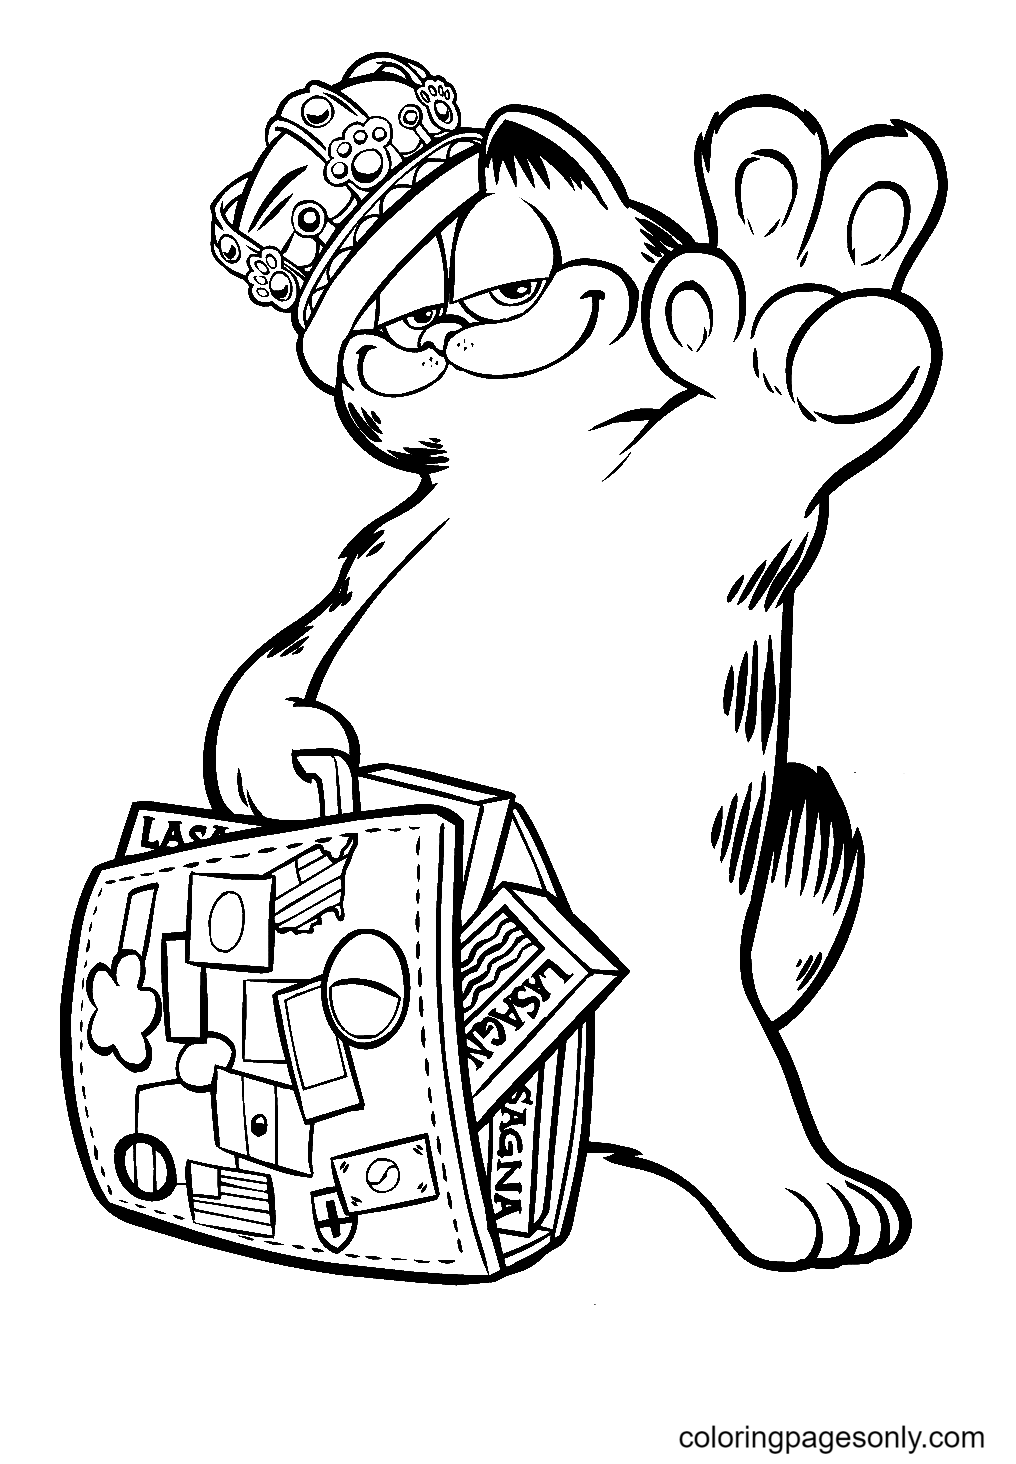 Garfield Traveling Coloring Pages